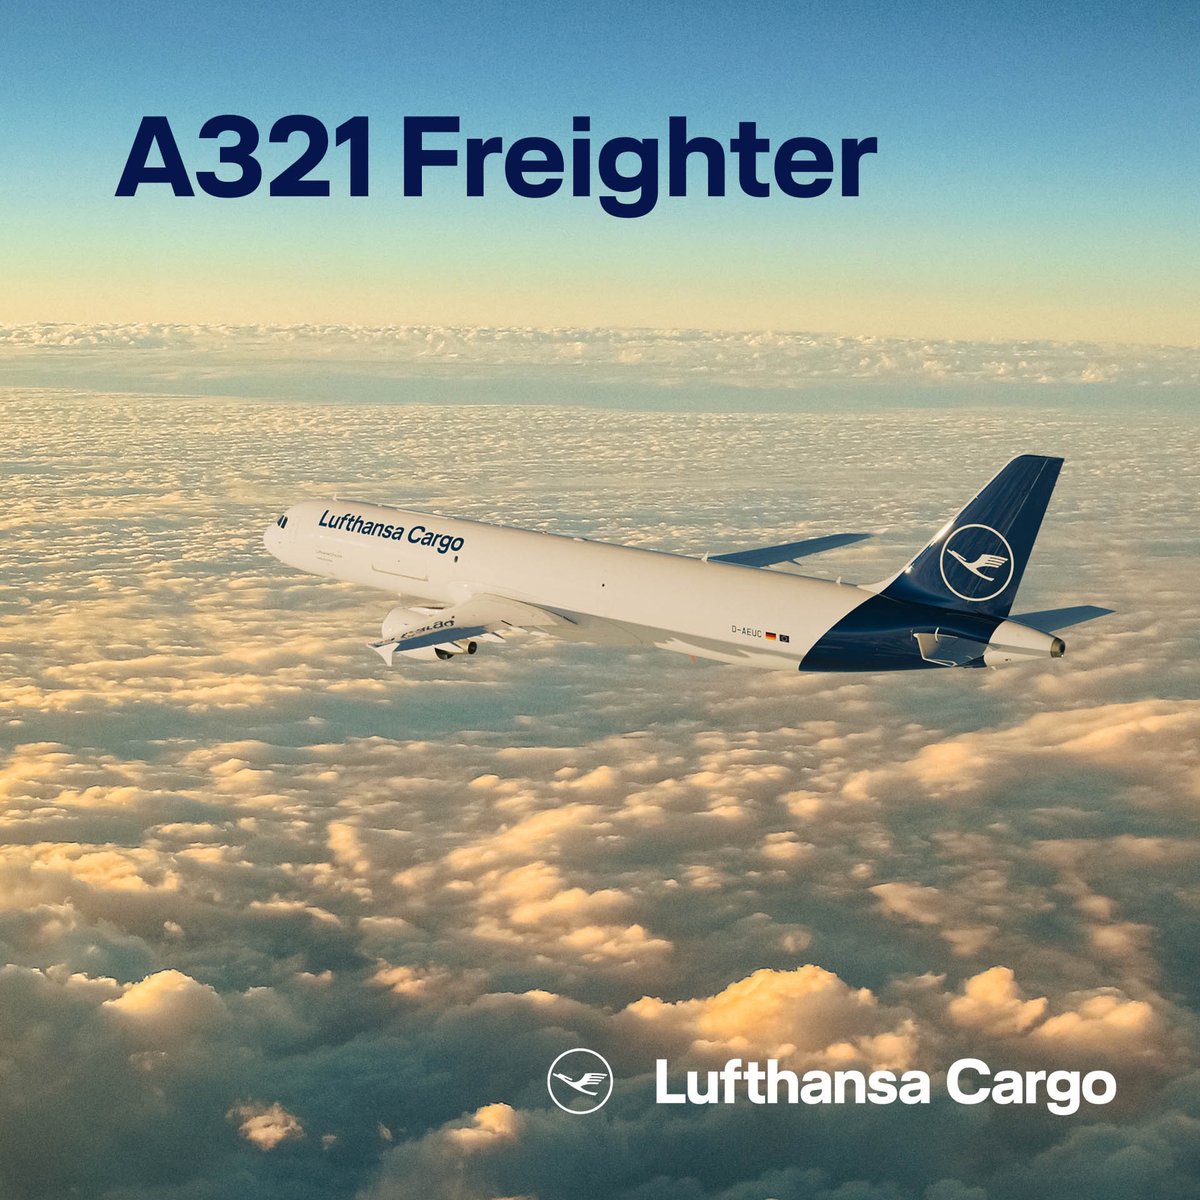 May we present the A321F in its new look. That's what a real Lufthansa Cargo freighter looks like! 💫
The A321 freighter with the registration D-AEUC with the addition "Operated by Lufthansa CityLine" shows the excellent cooperation with our partner from the Lufthansa family https://t.co/m7pILwN0MM